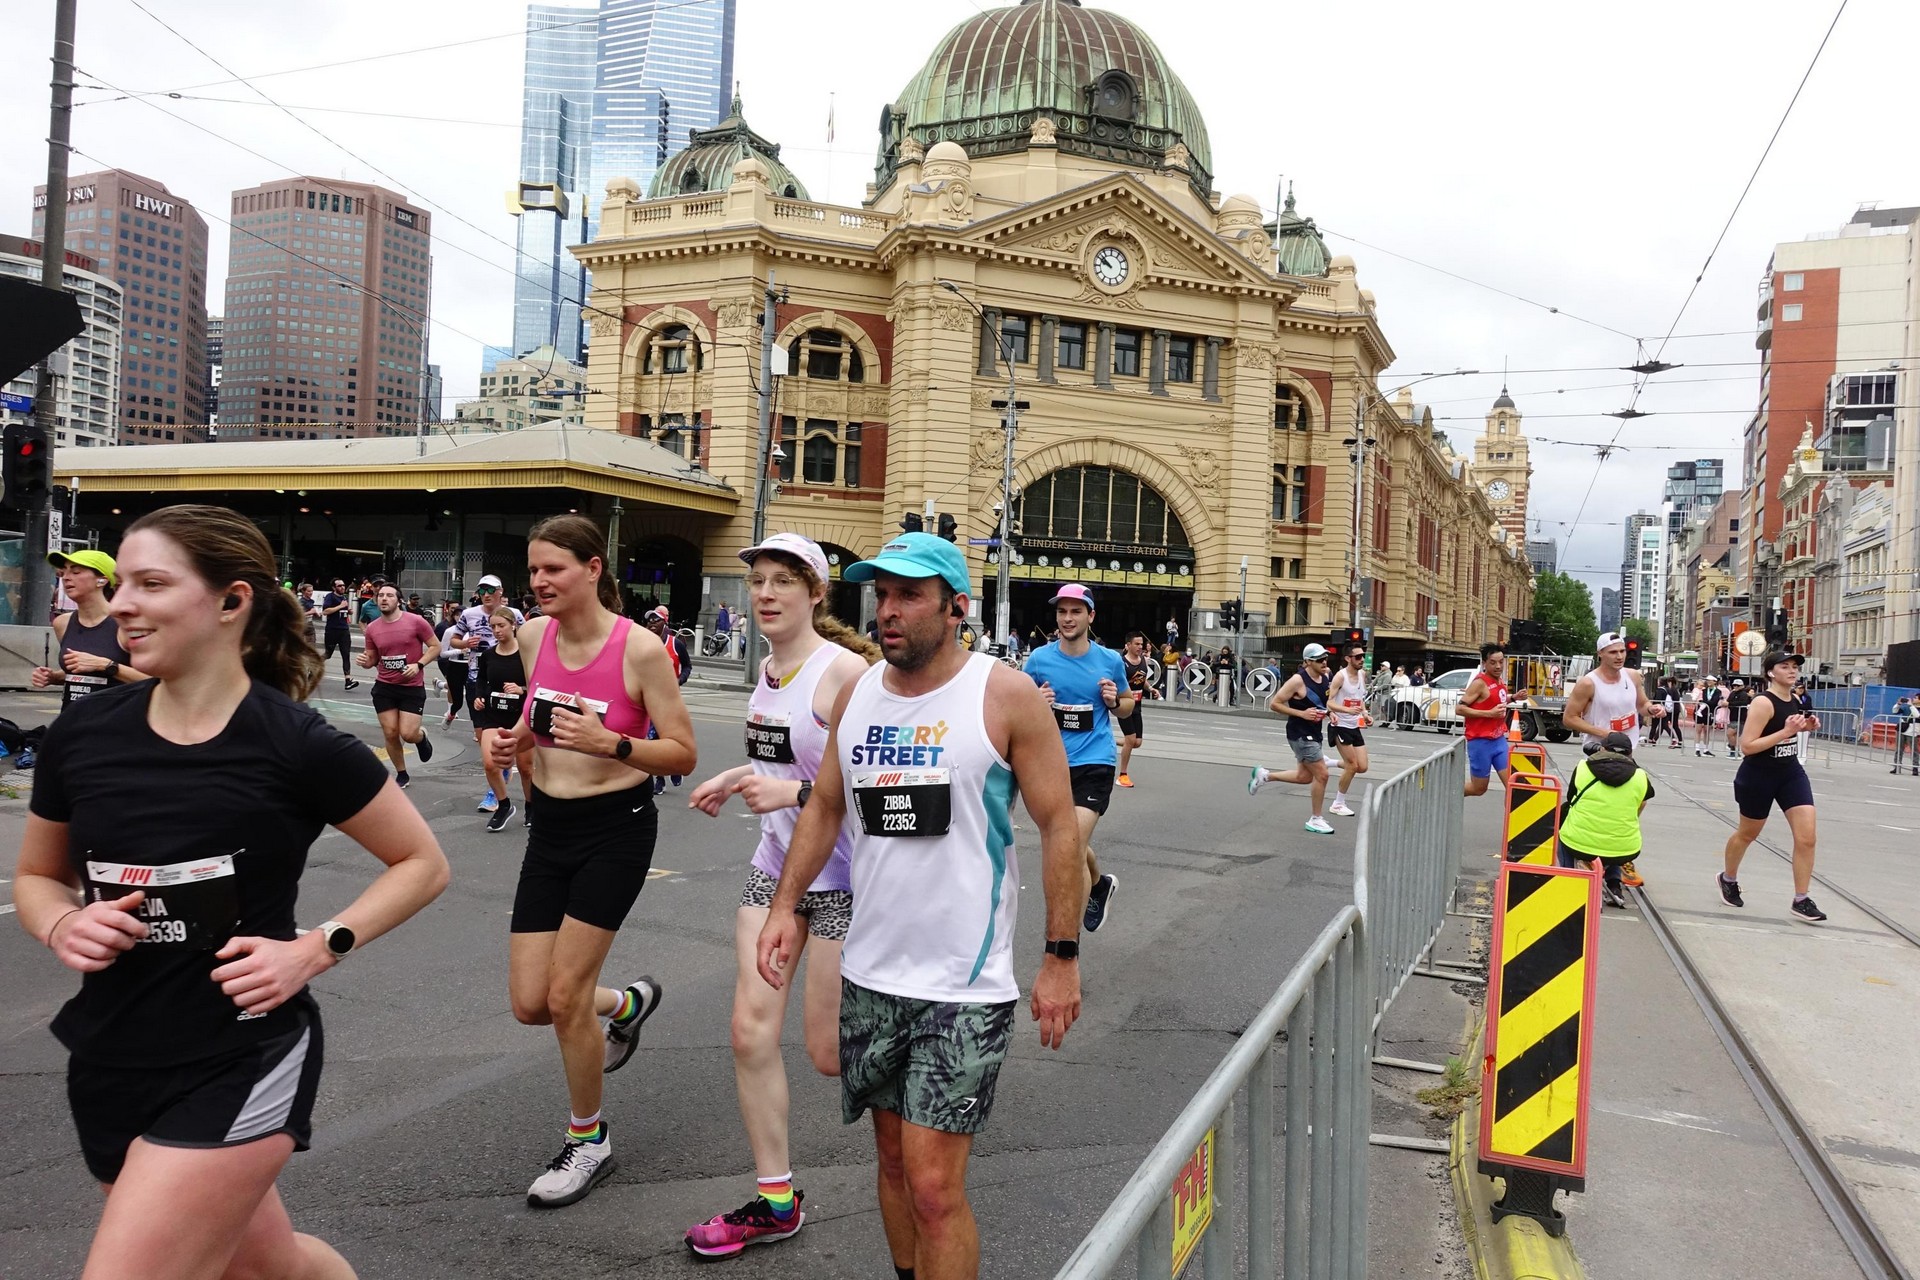 Alex and I running in front of Flinders St station